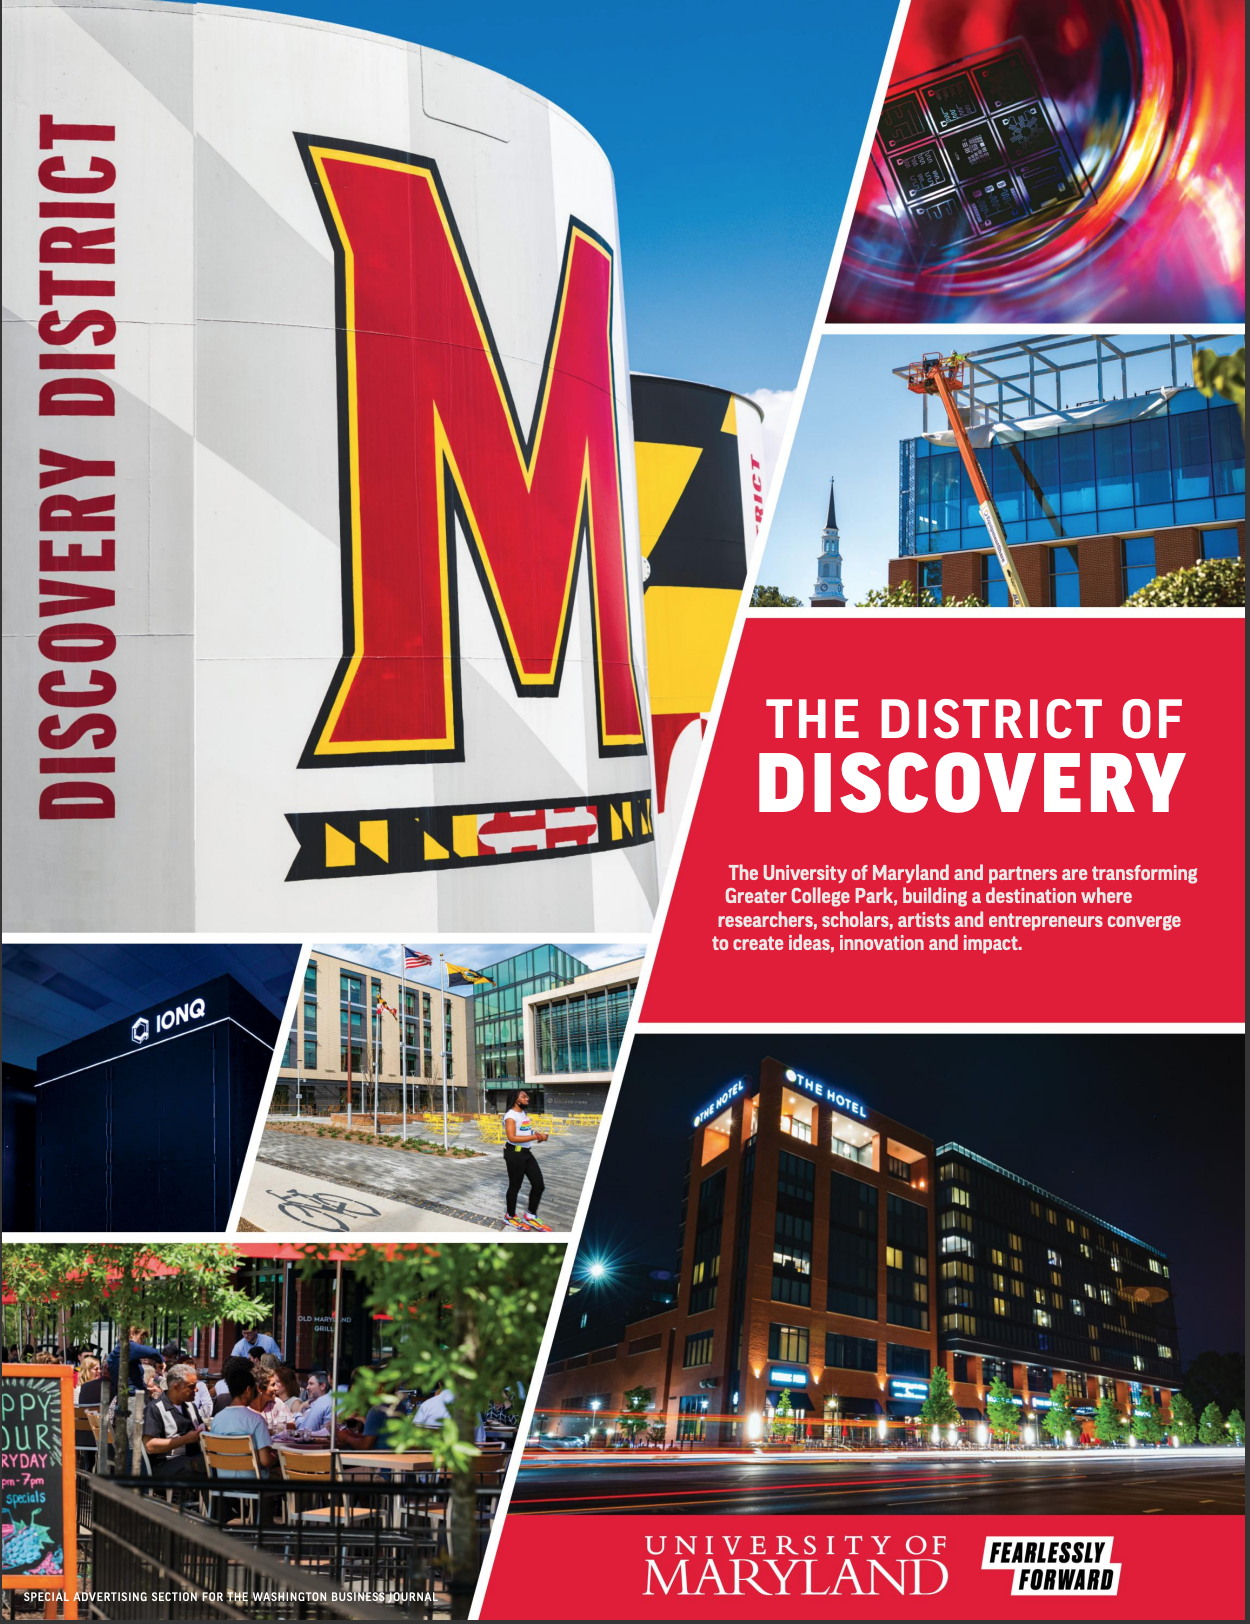 Washington Business Journal Feature on the Discovery District